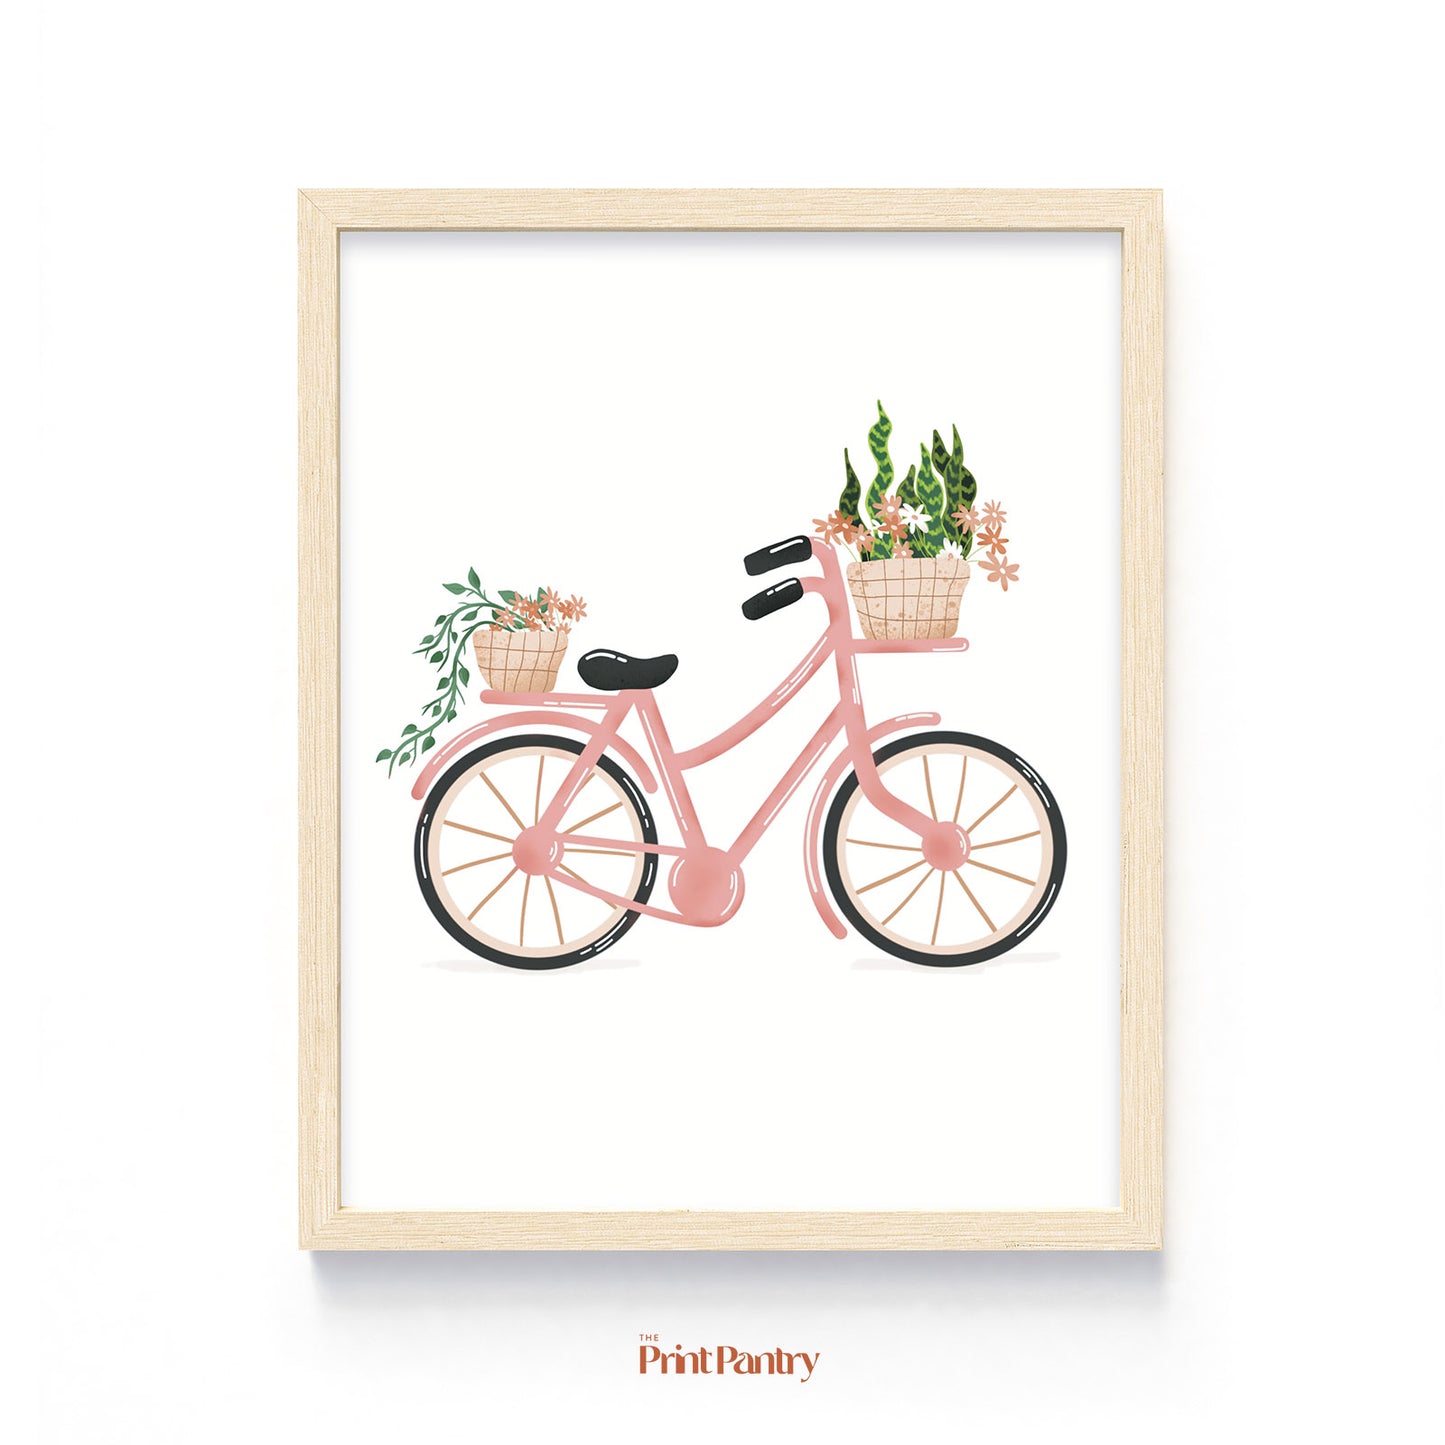 Floral Bicycle Art Print shown in a wooden frame